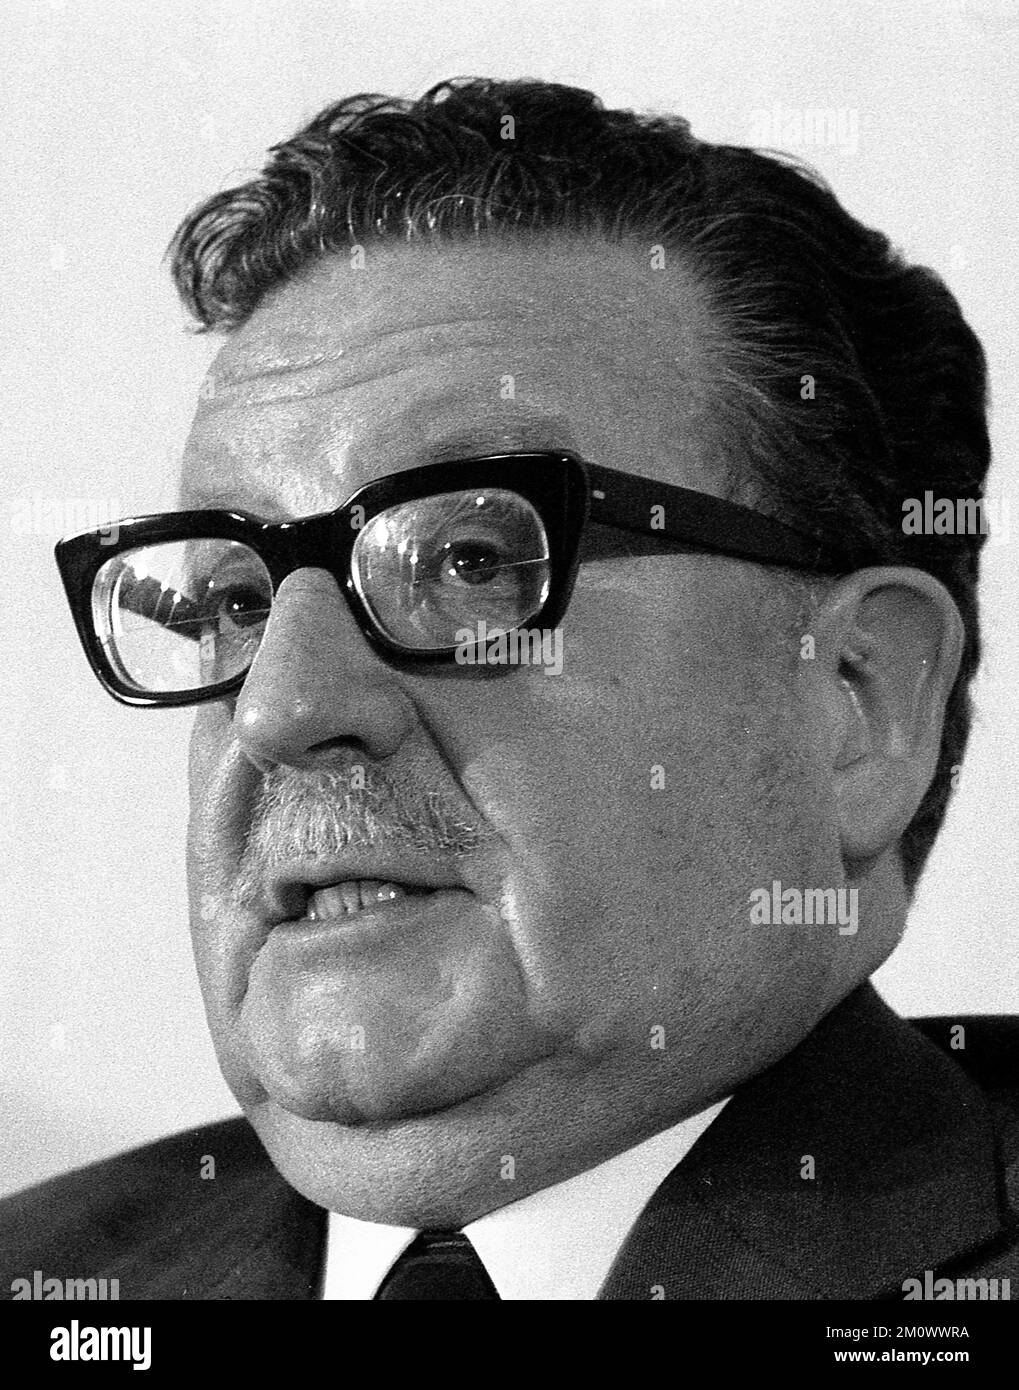 Salvador Allende, Chilean politician and president of Chile, during a press conference at the Chilean Embassy in Buenos Aires, Argentina. He attended the Héctor J. Cámpora inauguration as President of Argentina on May 1973. A few months later, on September 1973, he would commit suicide in his office during General Augusto Pinochet Ugarte´s takeover. Stock Photo